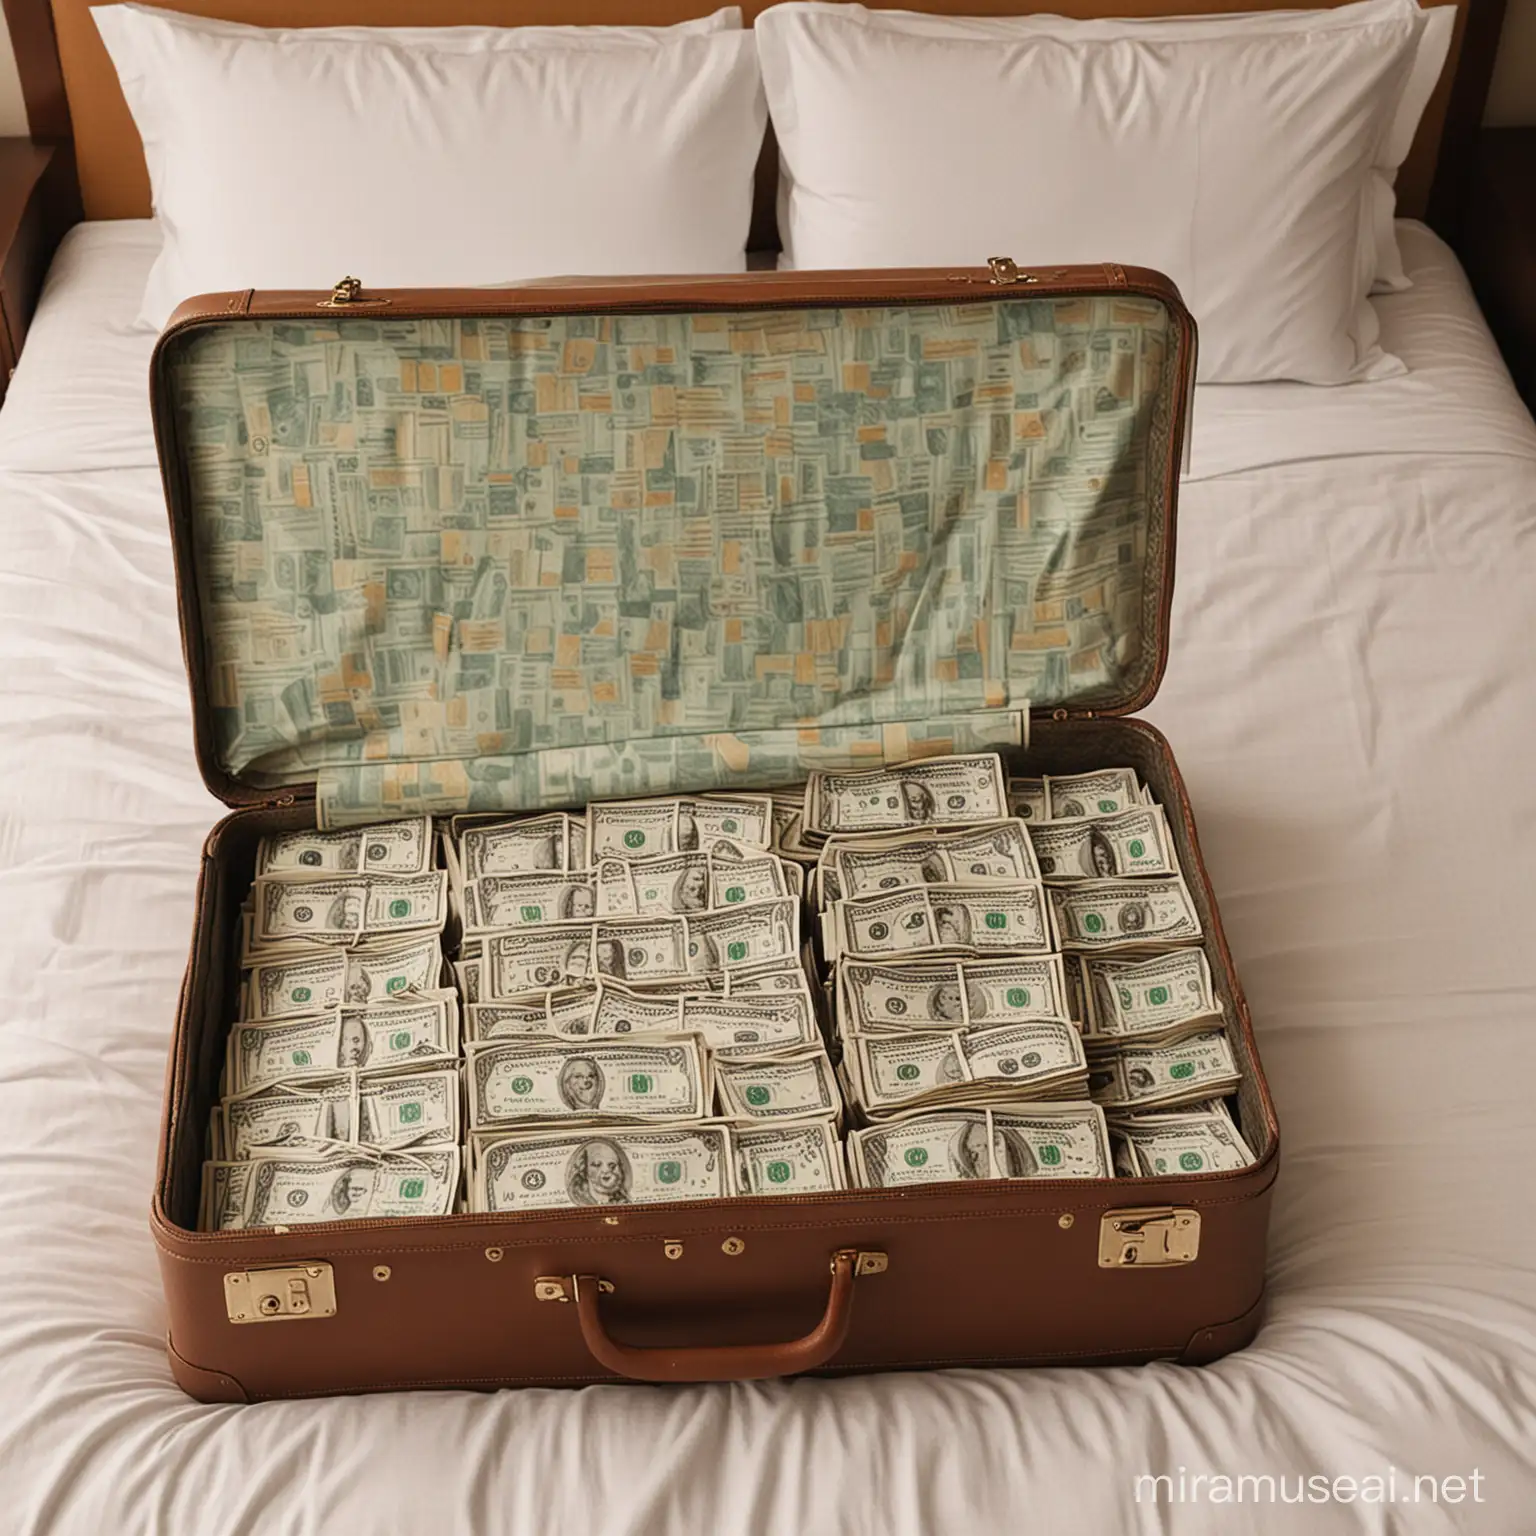 Hotel Room Bed with Open Suitcase Filled with American Currency